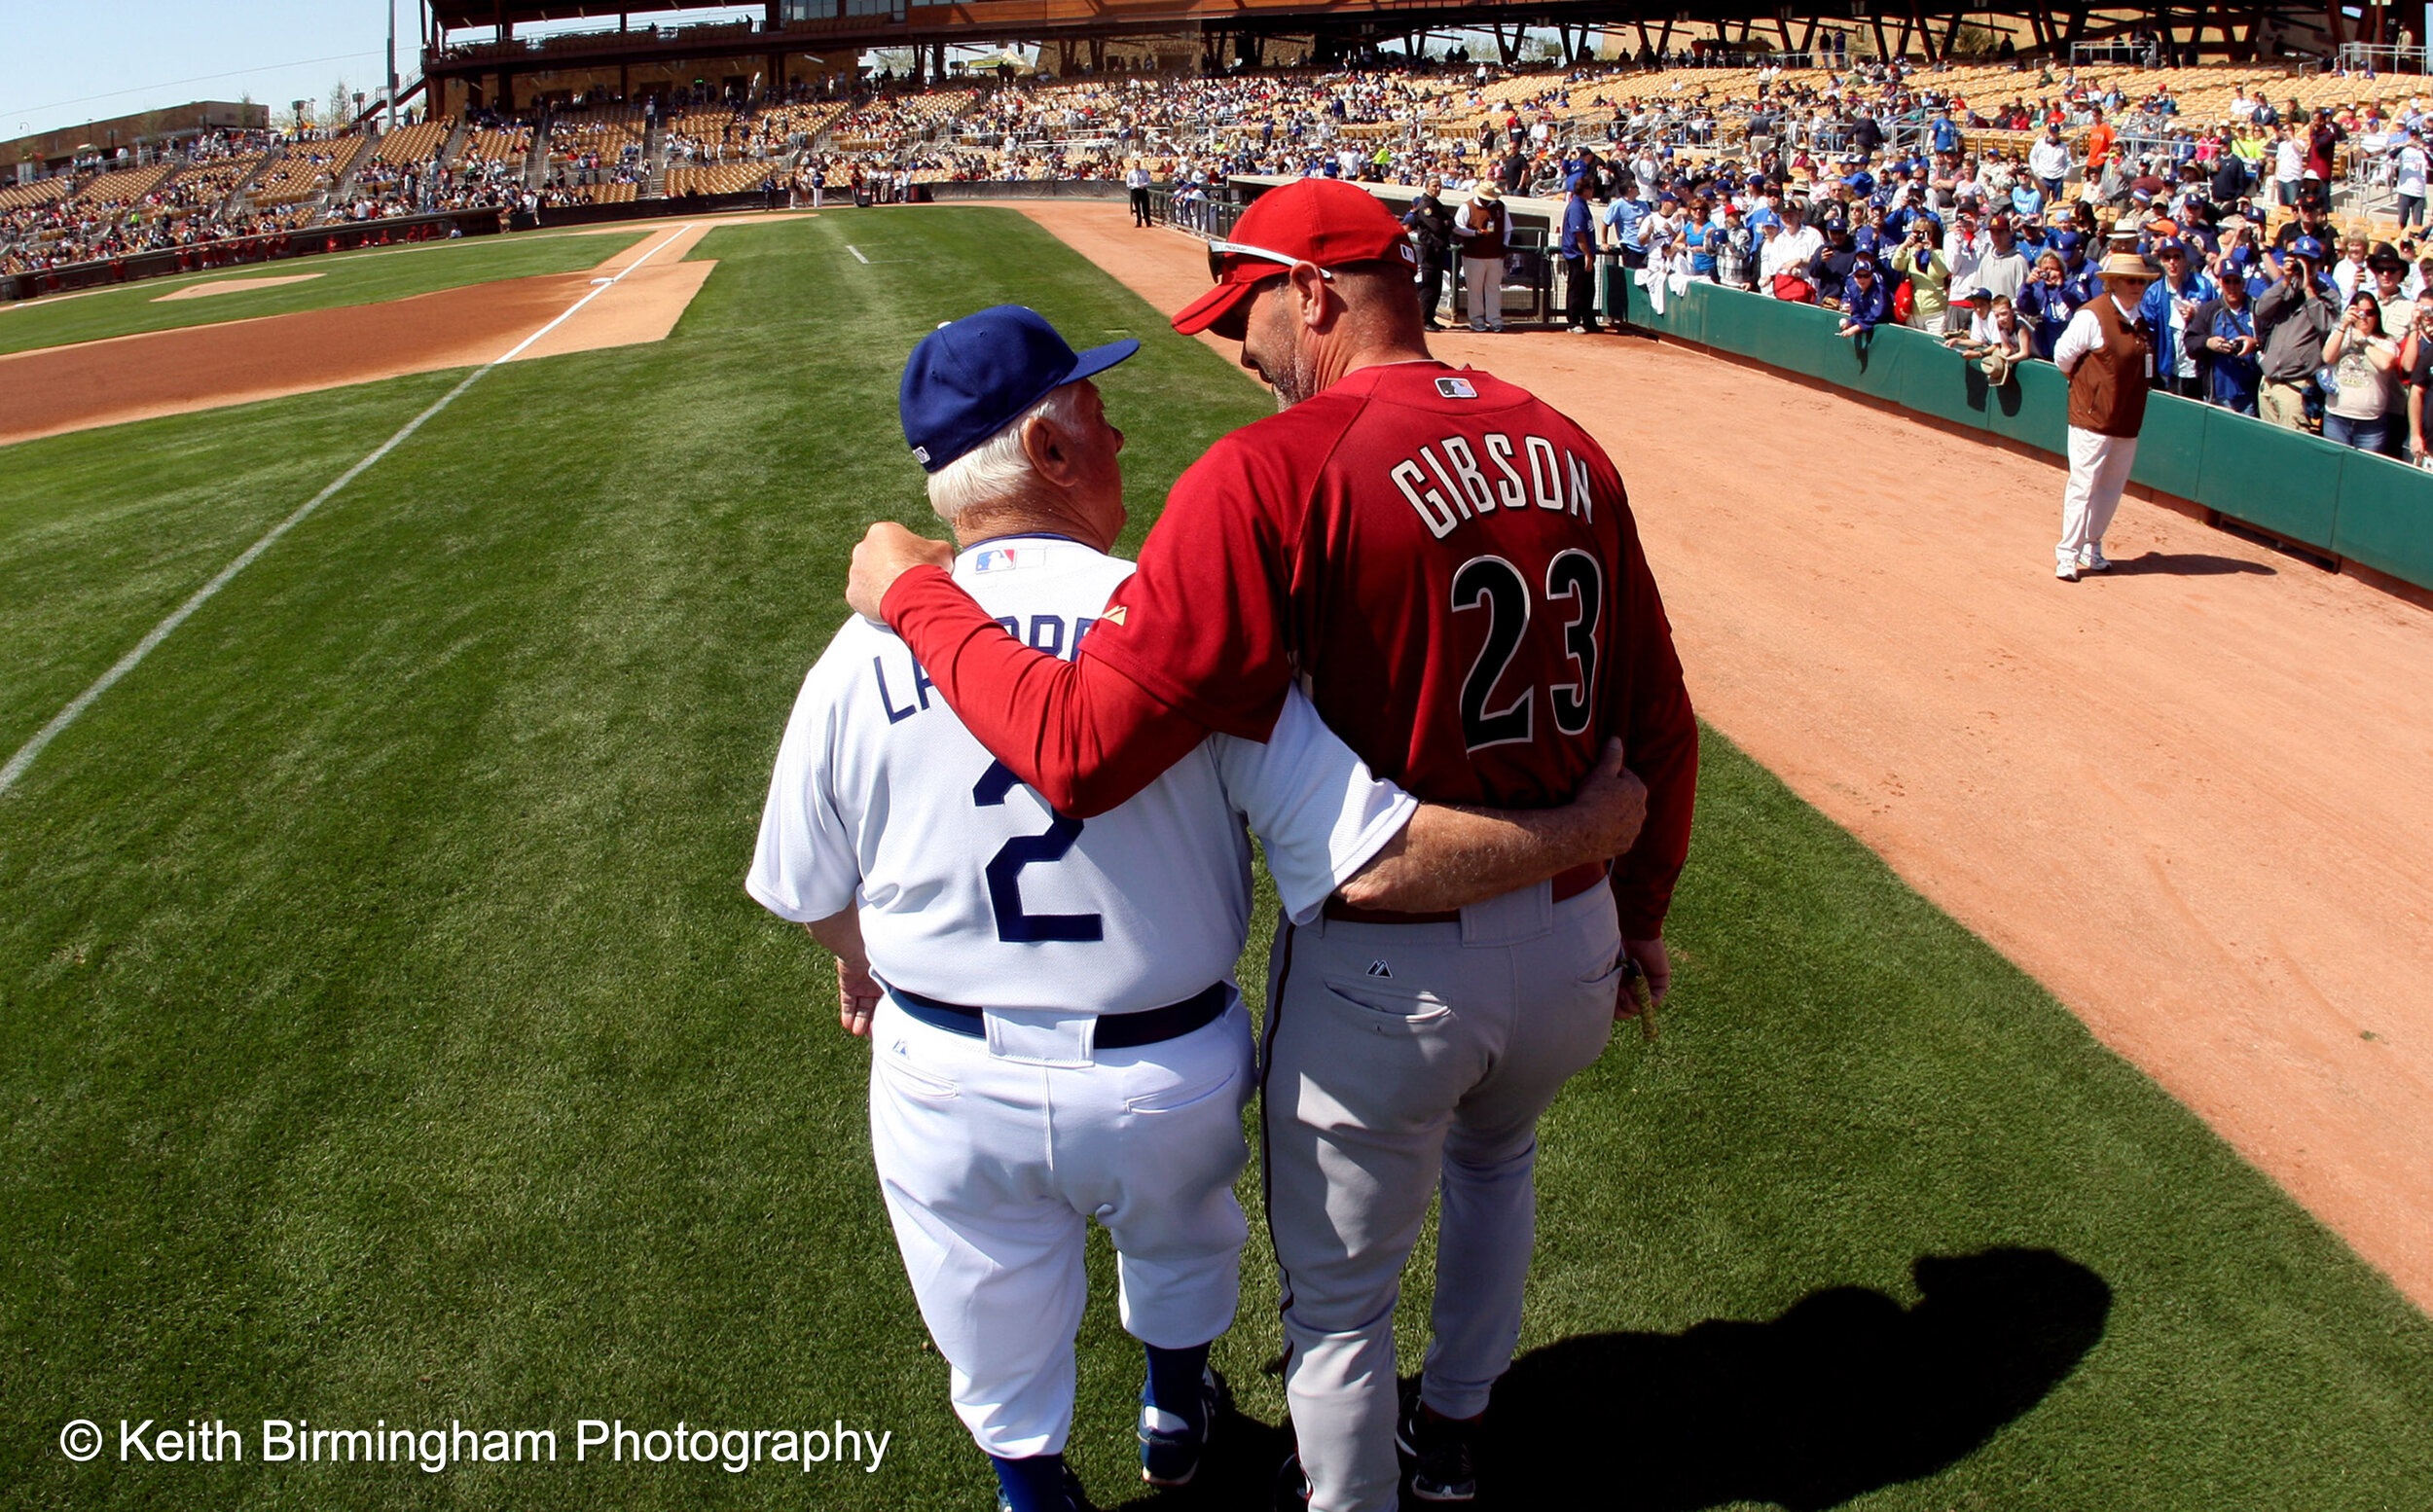  Los Angeles Dodgers former manager Tommy Lasorda and former Dodger great and current Arizona Diamondbacks bench coach Kirk Gibson (23) share a moment before a game at the Ballpark at Camelback Ranch on Wednesday, March 10, 2010, in Glendale,Arizona.